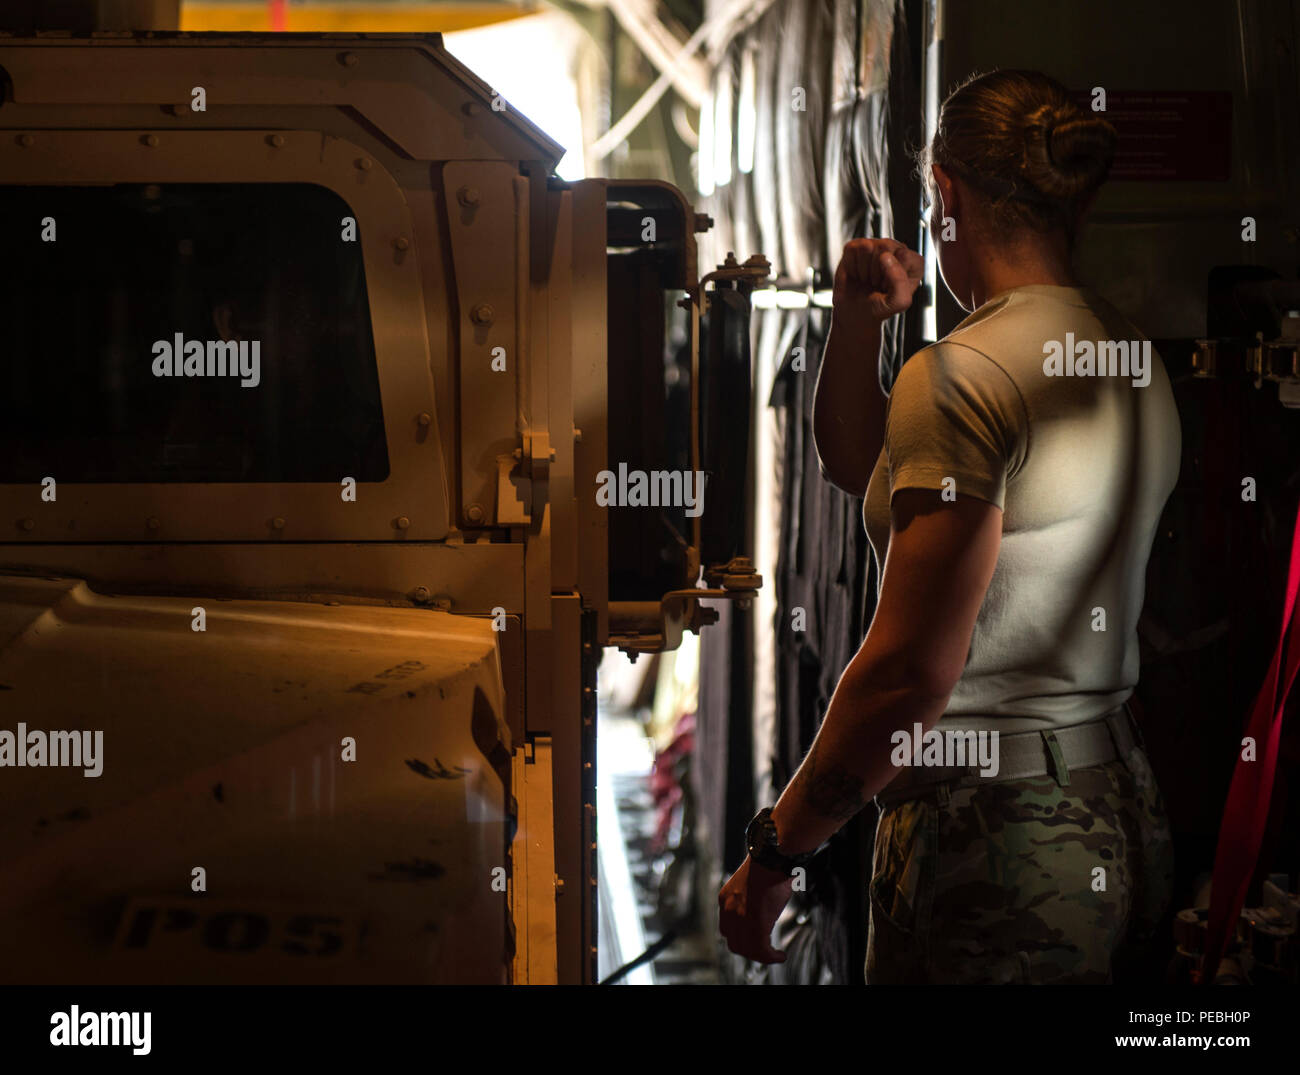 Staff Sgt. Whitney Woolverson, 75th Expeditionary Airlift Squadron loadmaster, directs a Charlie Co. 2-124 up-armored Humvee into a C-130J Super Hercules, Nov. 24, 2015, at Camp Lemonnier, Djibouti. The vehicle and additional cargo were delivered to Task Force Seminole of the Florida Army National Guard, which is deployed to a forward operating location in support of the Combined Joint Task Force-Horn of Africa mission. (U.S. Air Force photo by Senior Airman Peter Thompson) Stock Photo